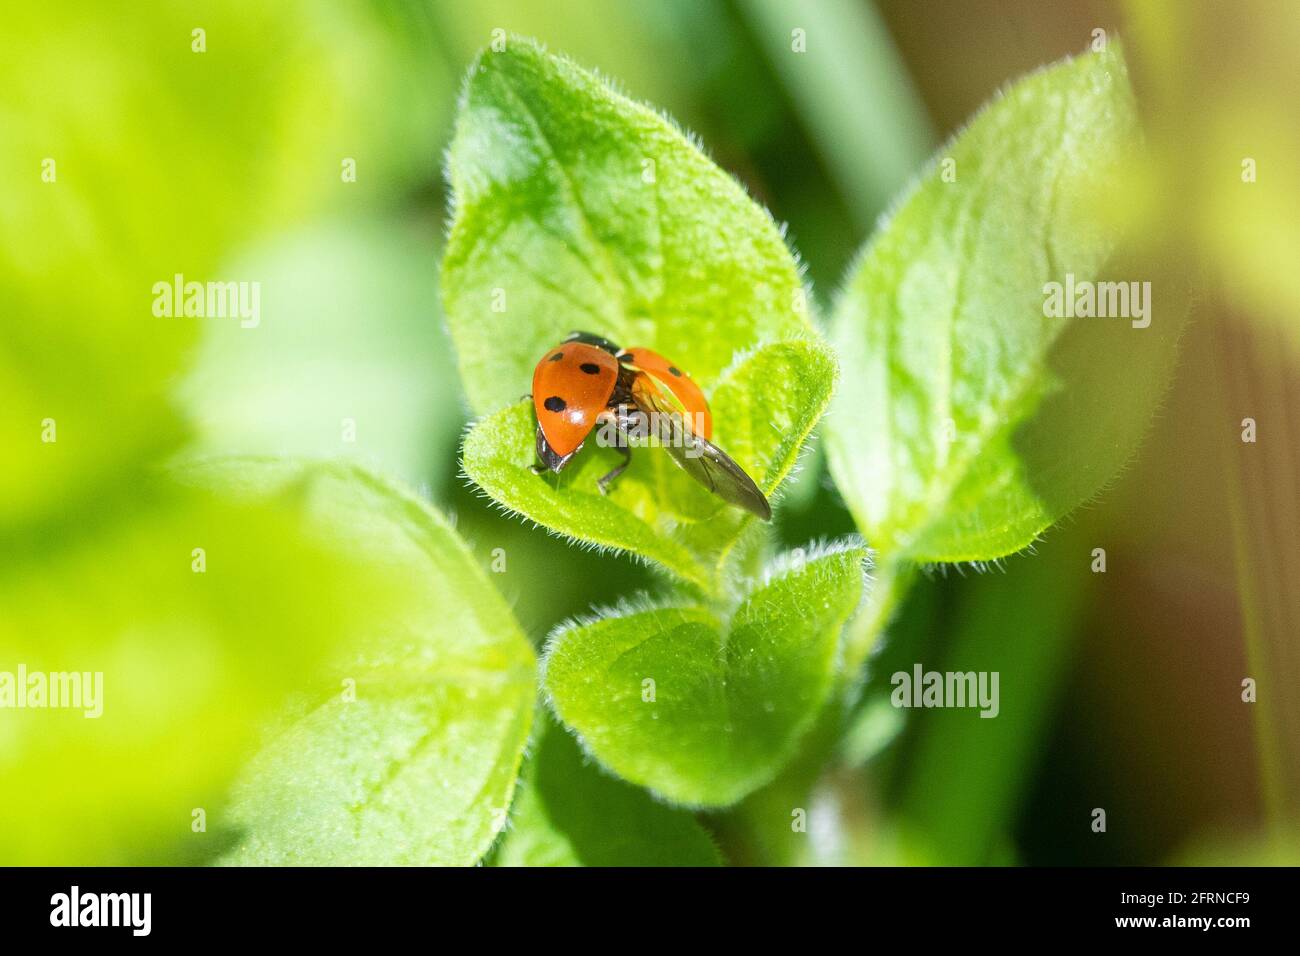 Ladybird folding its wings using abdomen and surface of elytra - unusually visible with elytra still open - origami like folds can be seen - UK Stock Photo